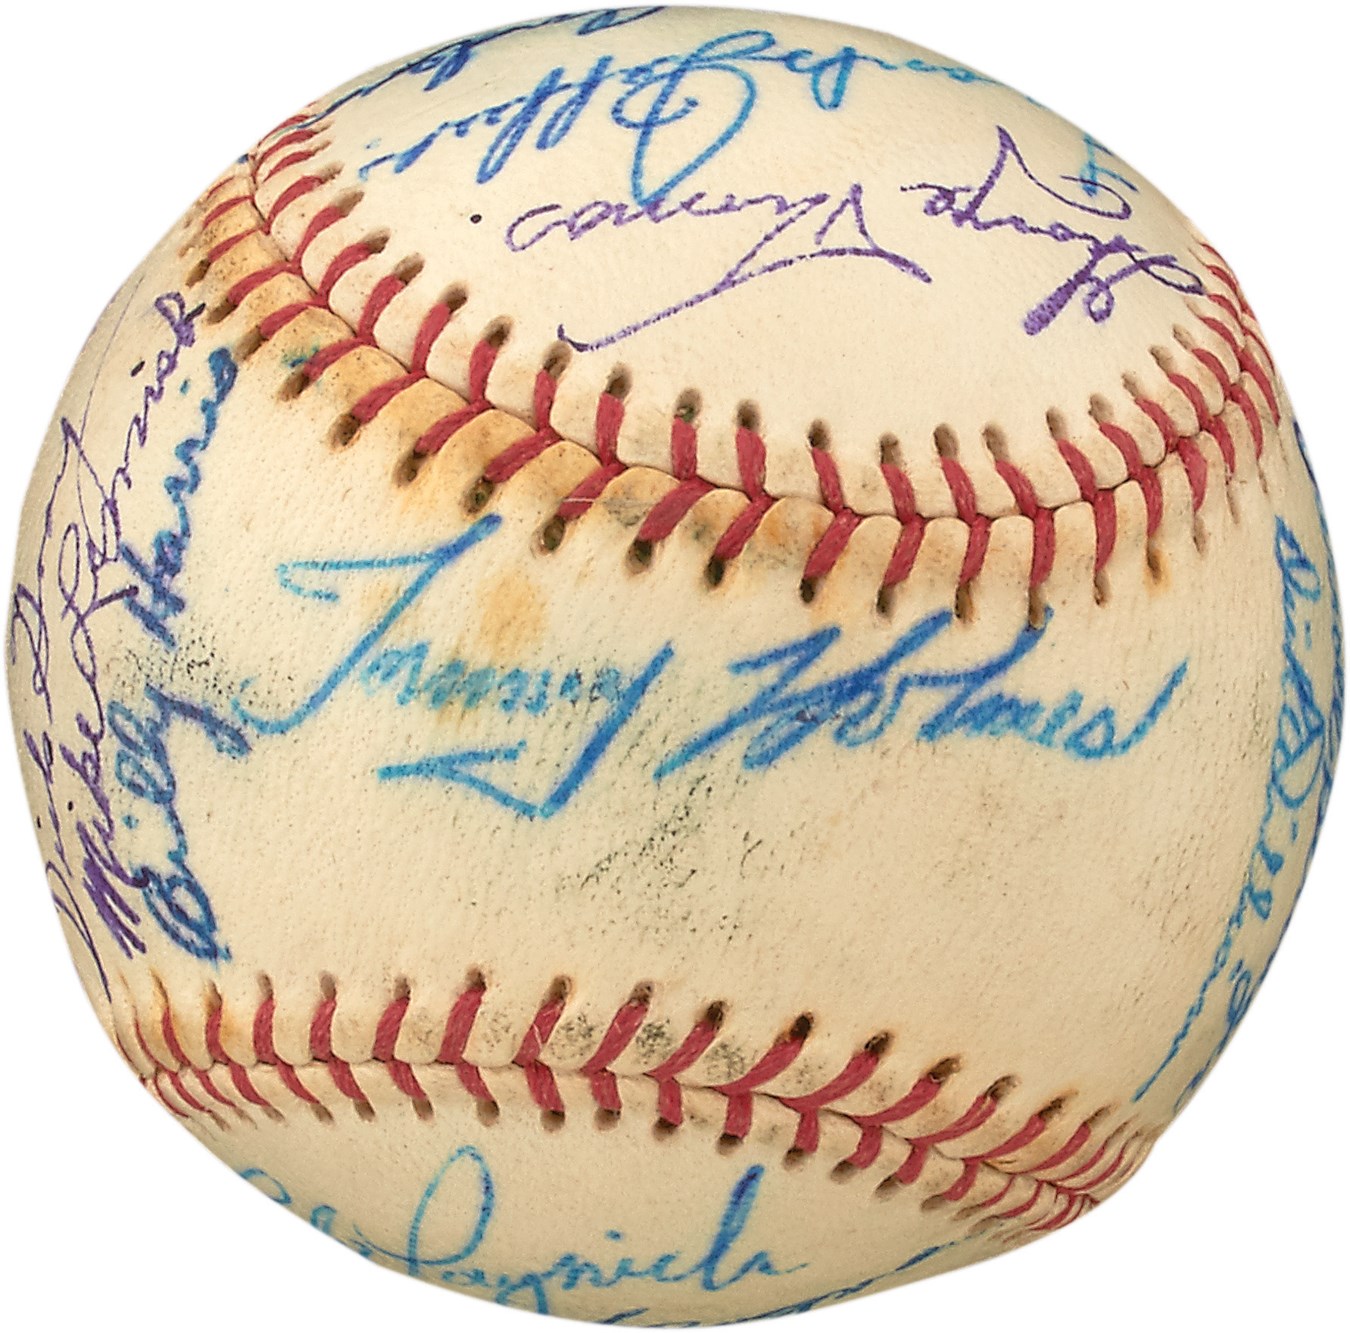 Baseball Autographs - Circa 1958 Montreal Royals Team-Signed Baseball with Early Sparky Anderson